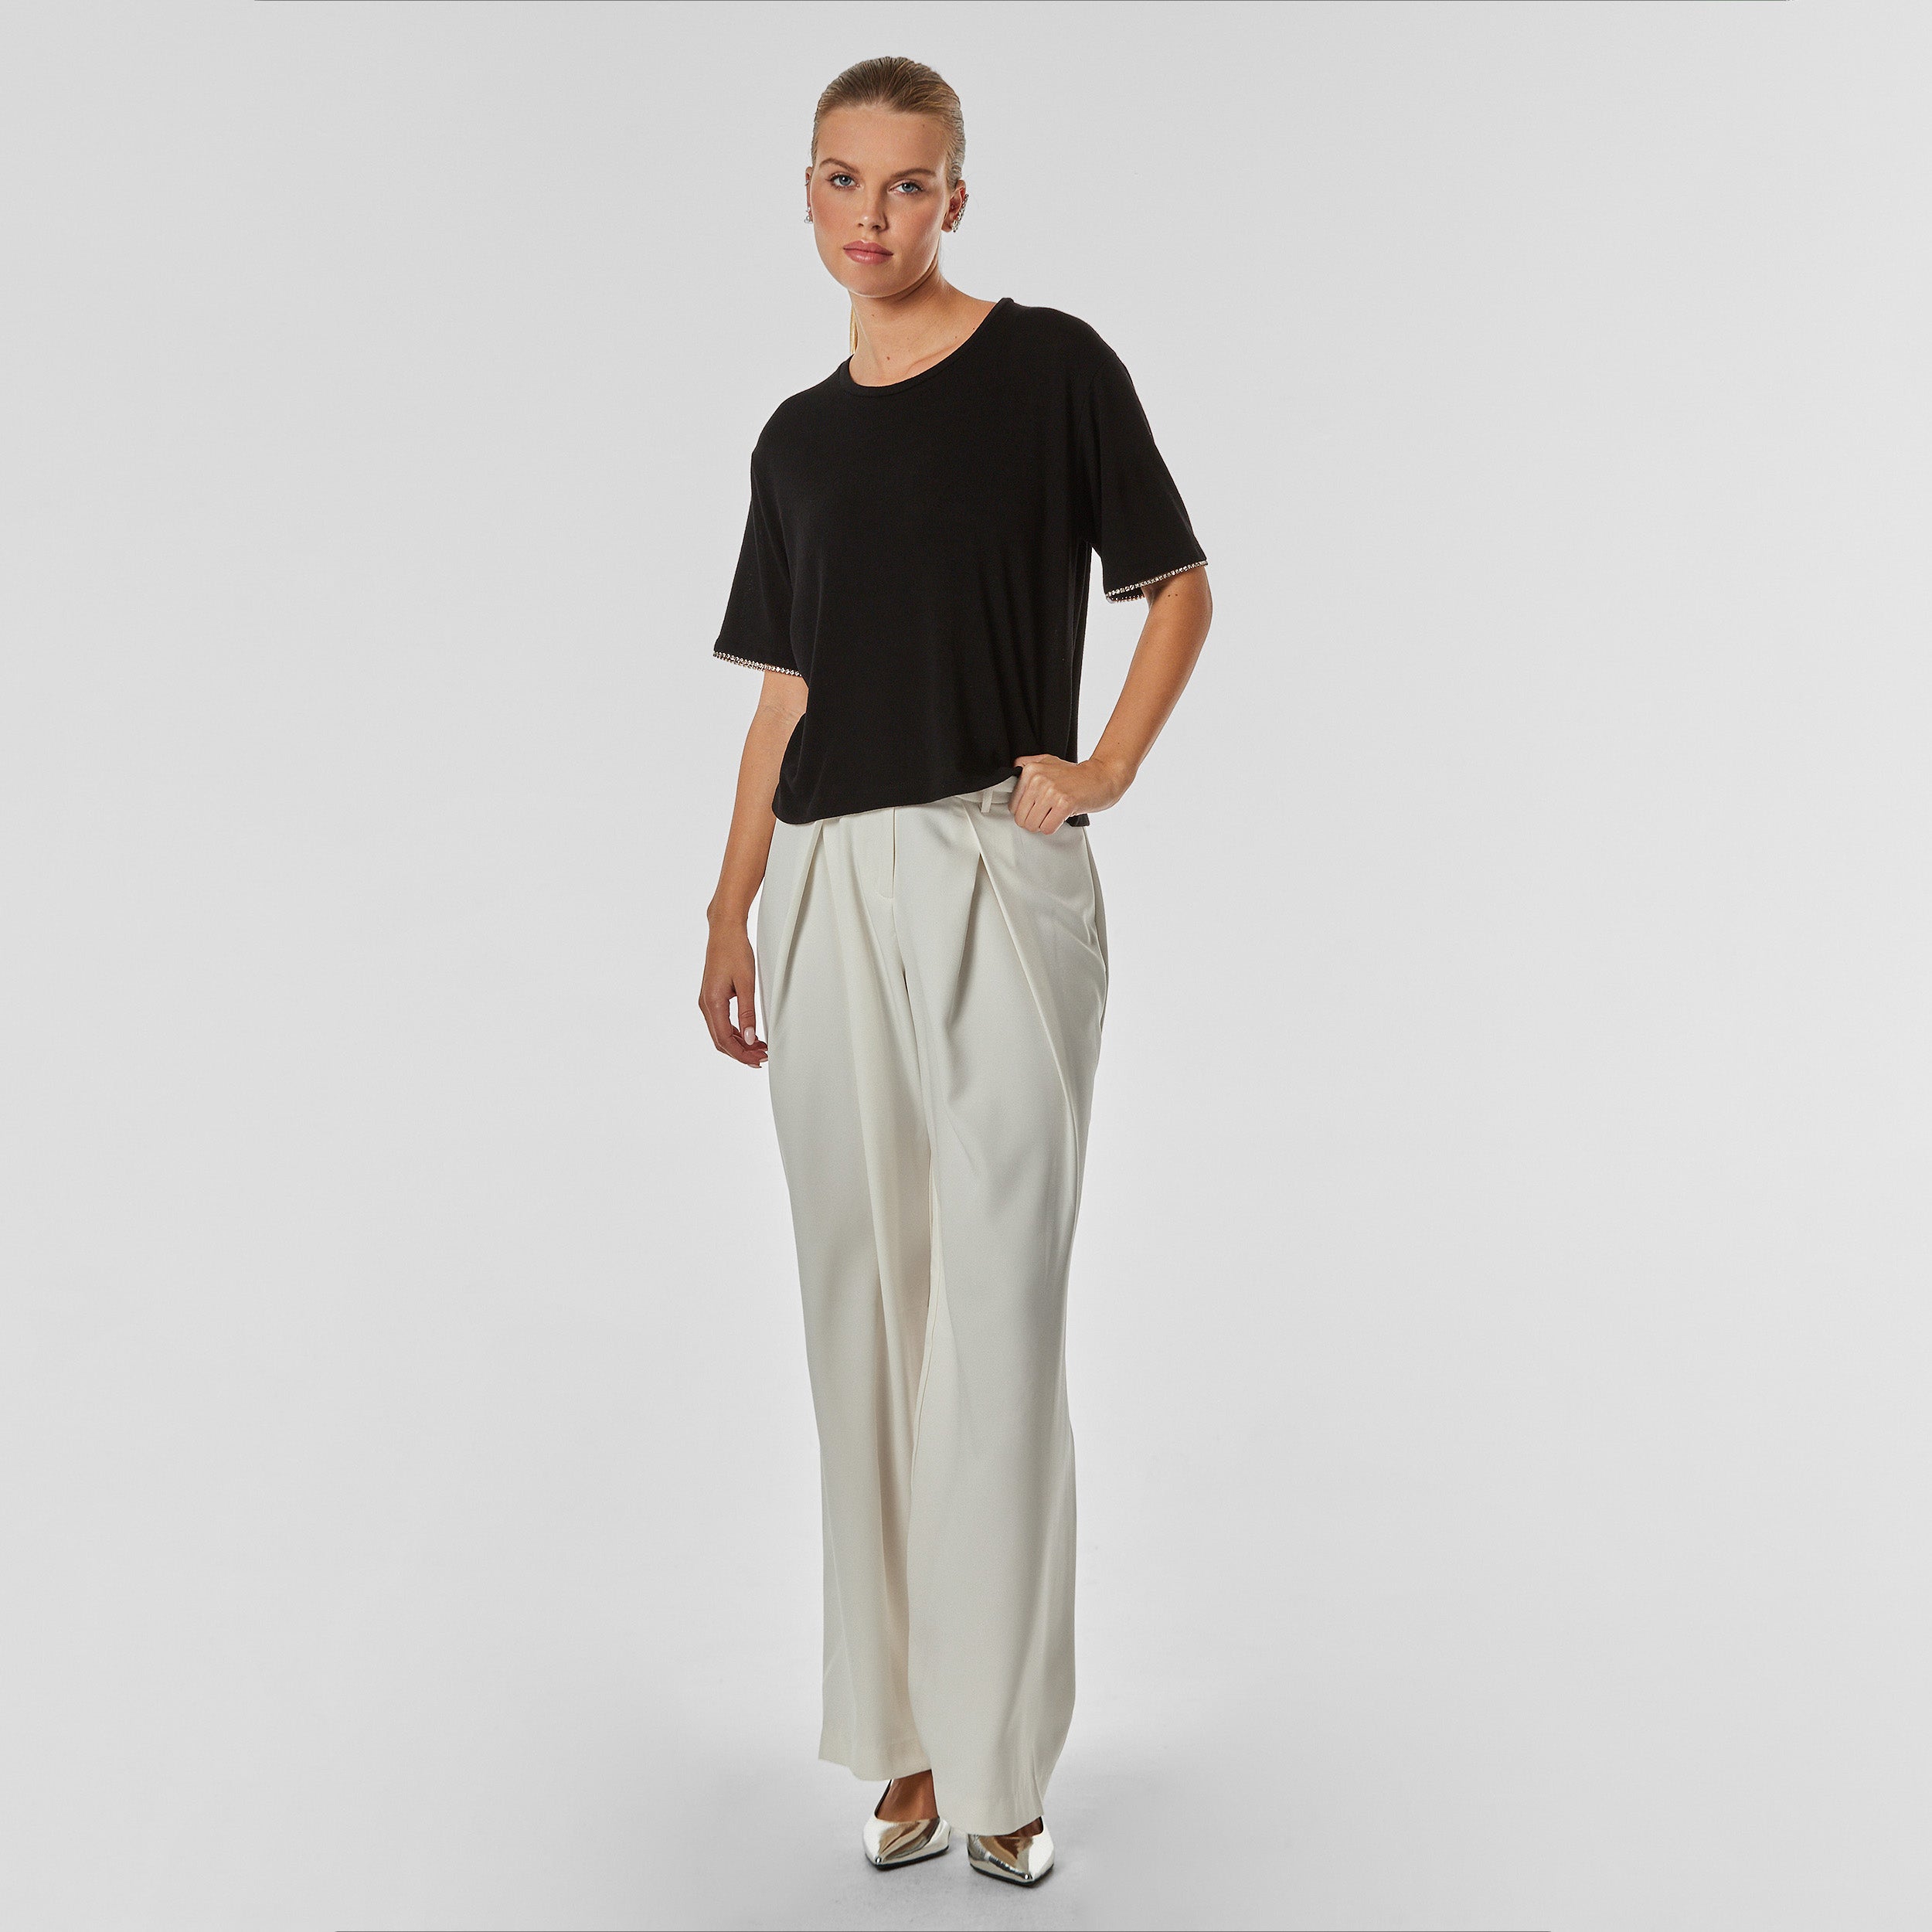 Full body view of woman wearing pleated cream colored trousers with stretch fabric